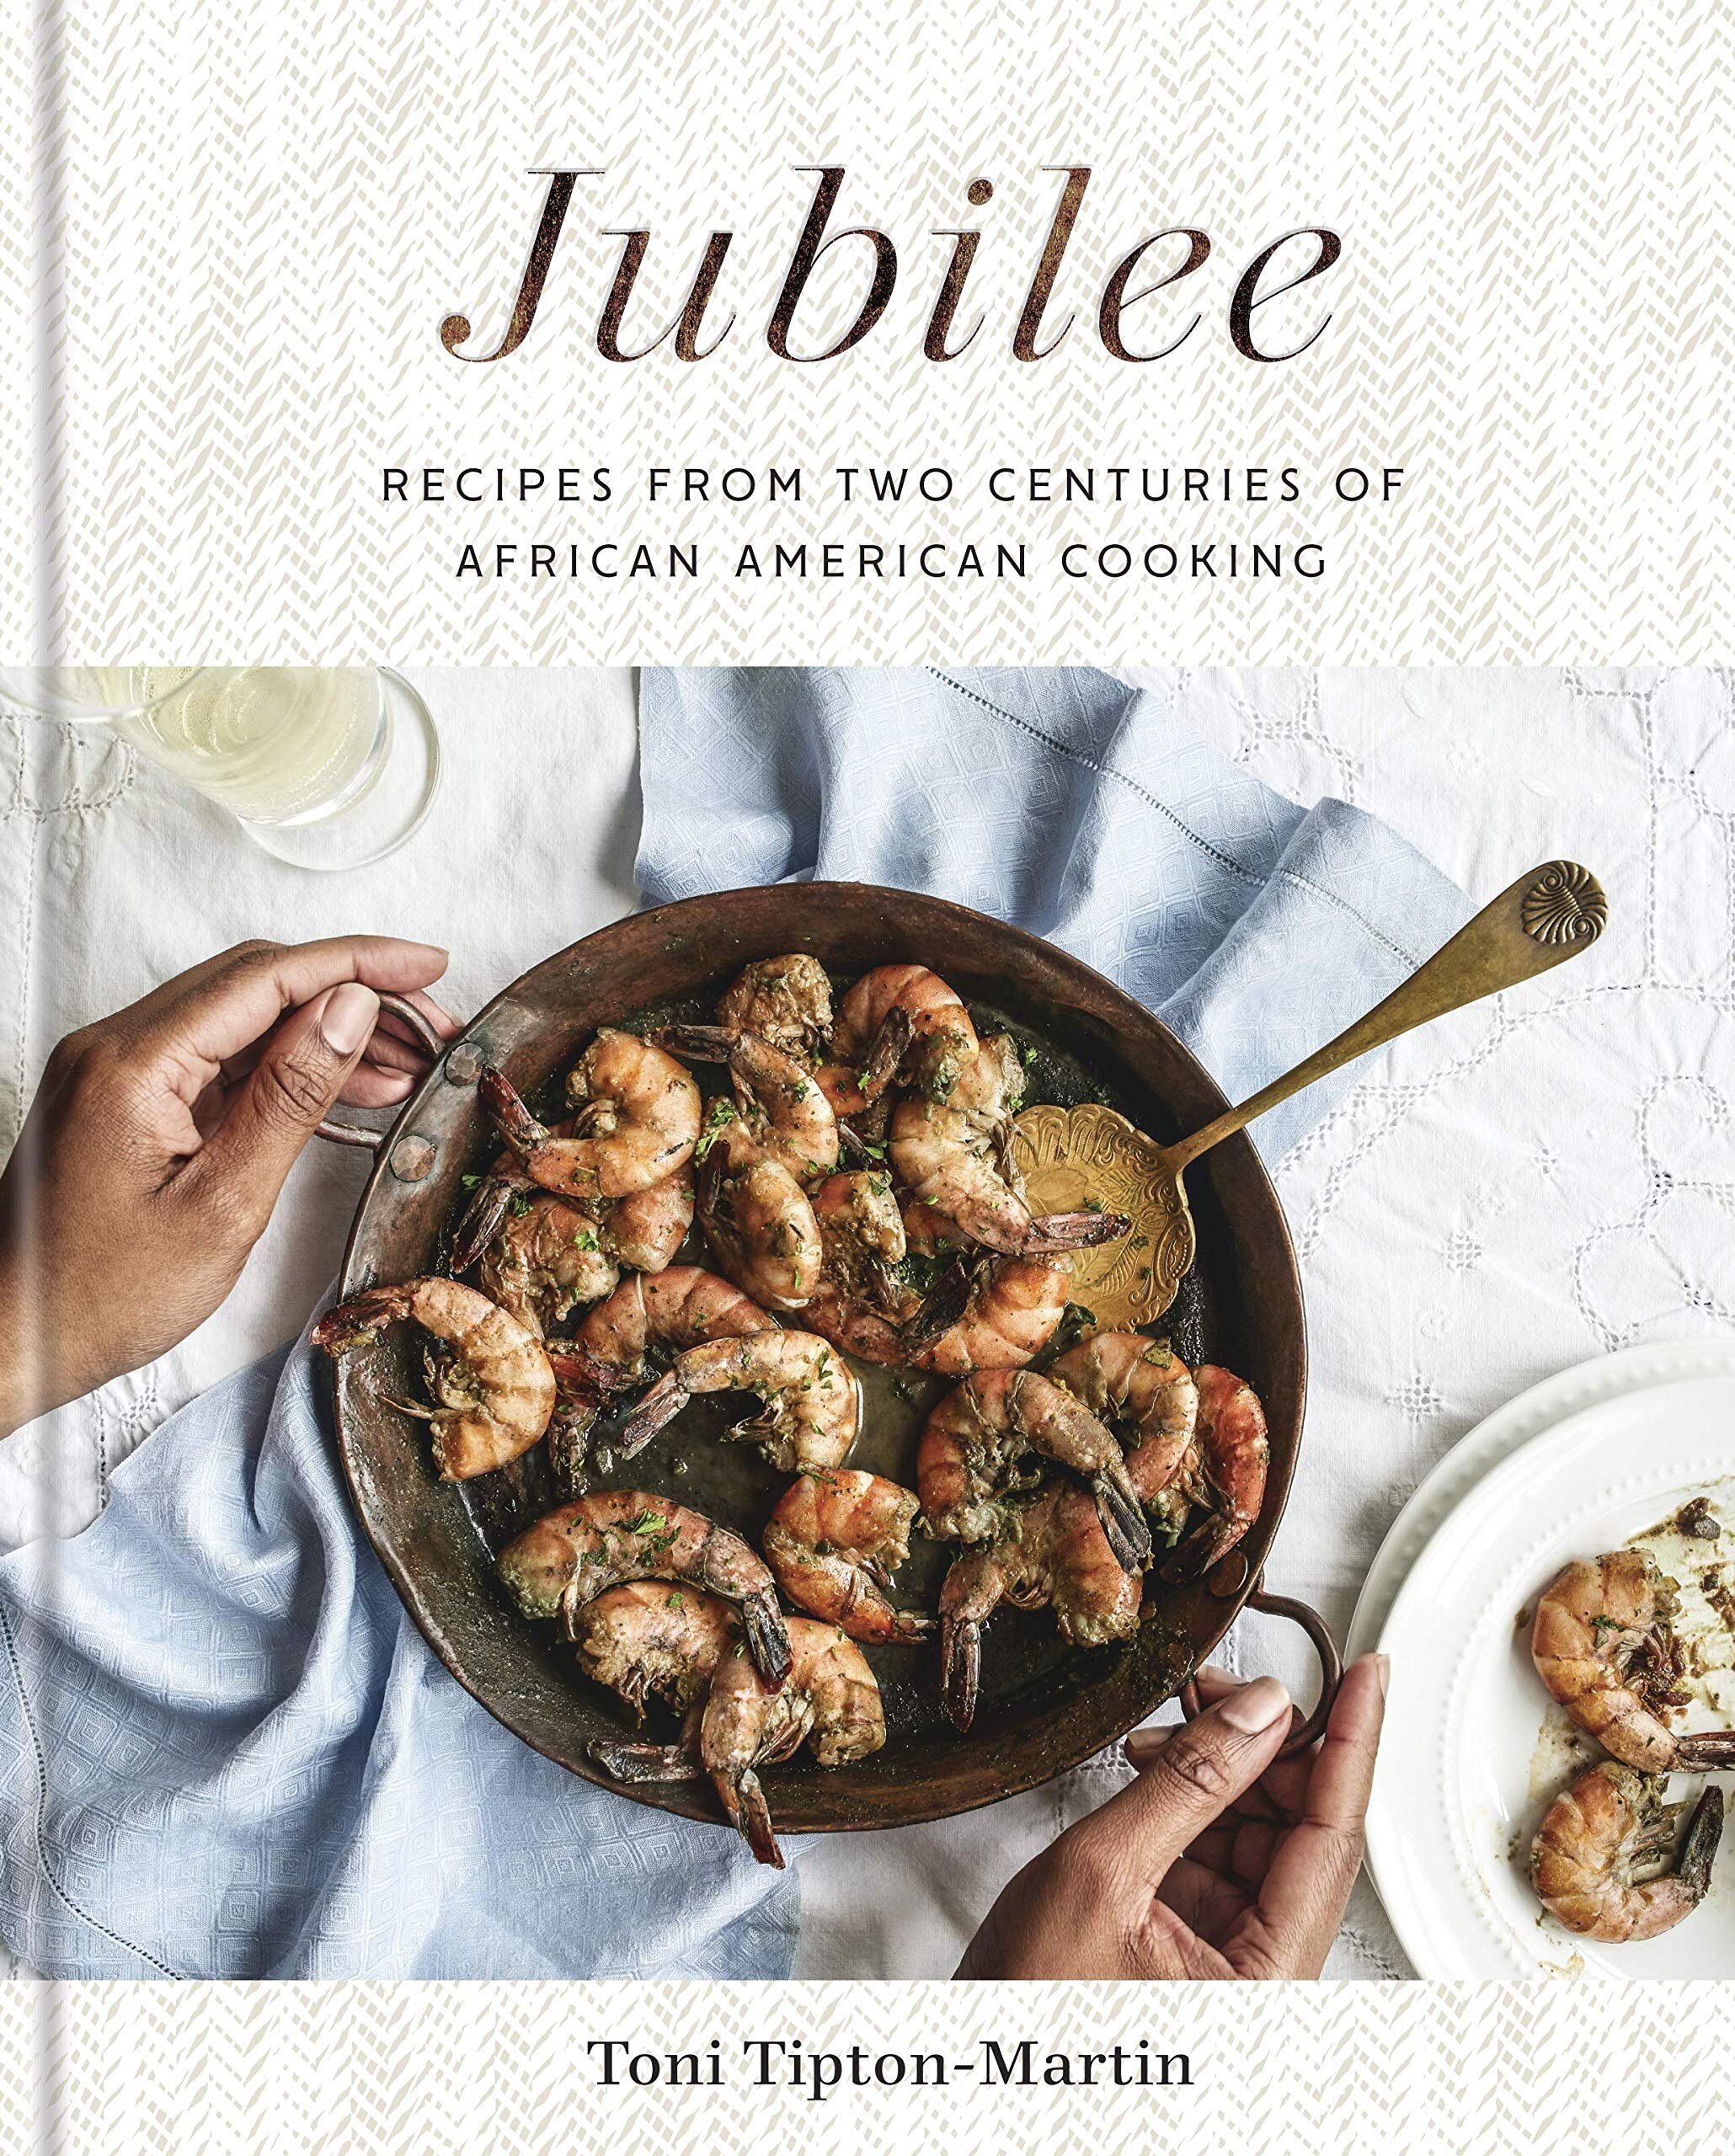 Jubilee Recipes from Two Centuries of African American Cooking by Toni Tipton-Martin